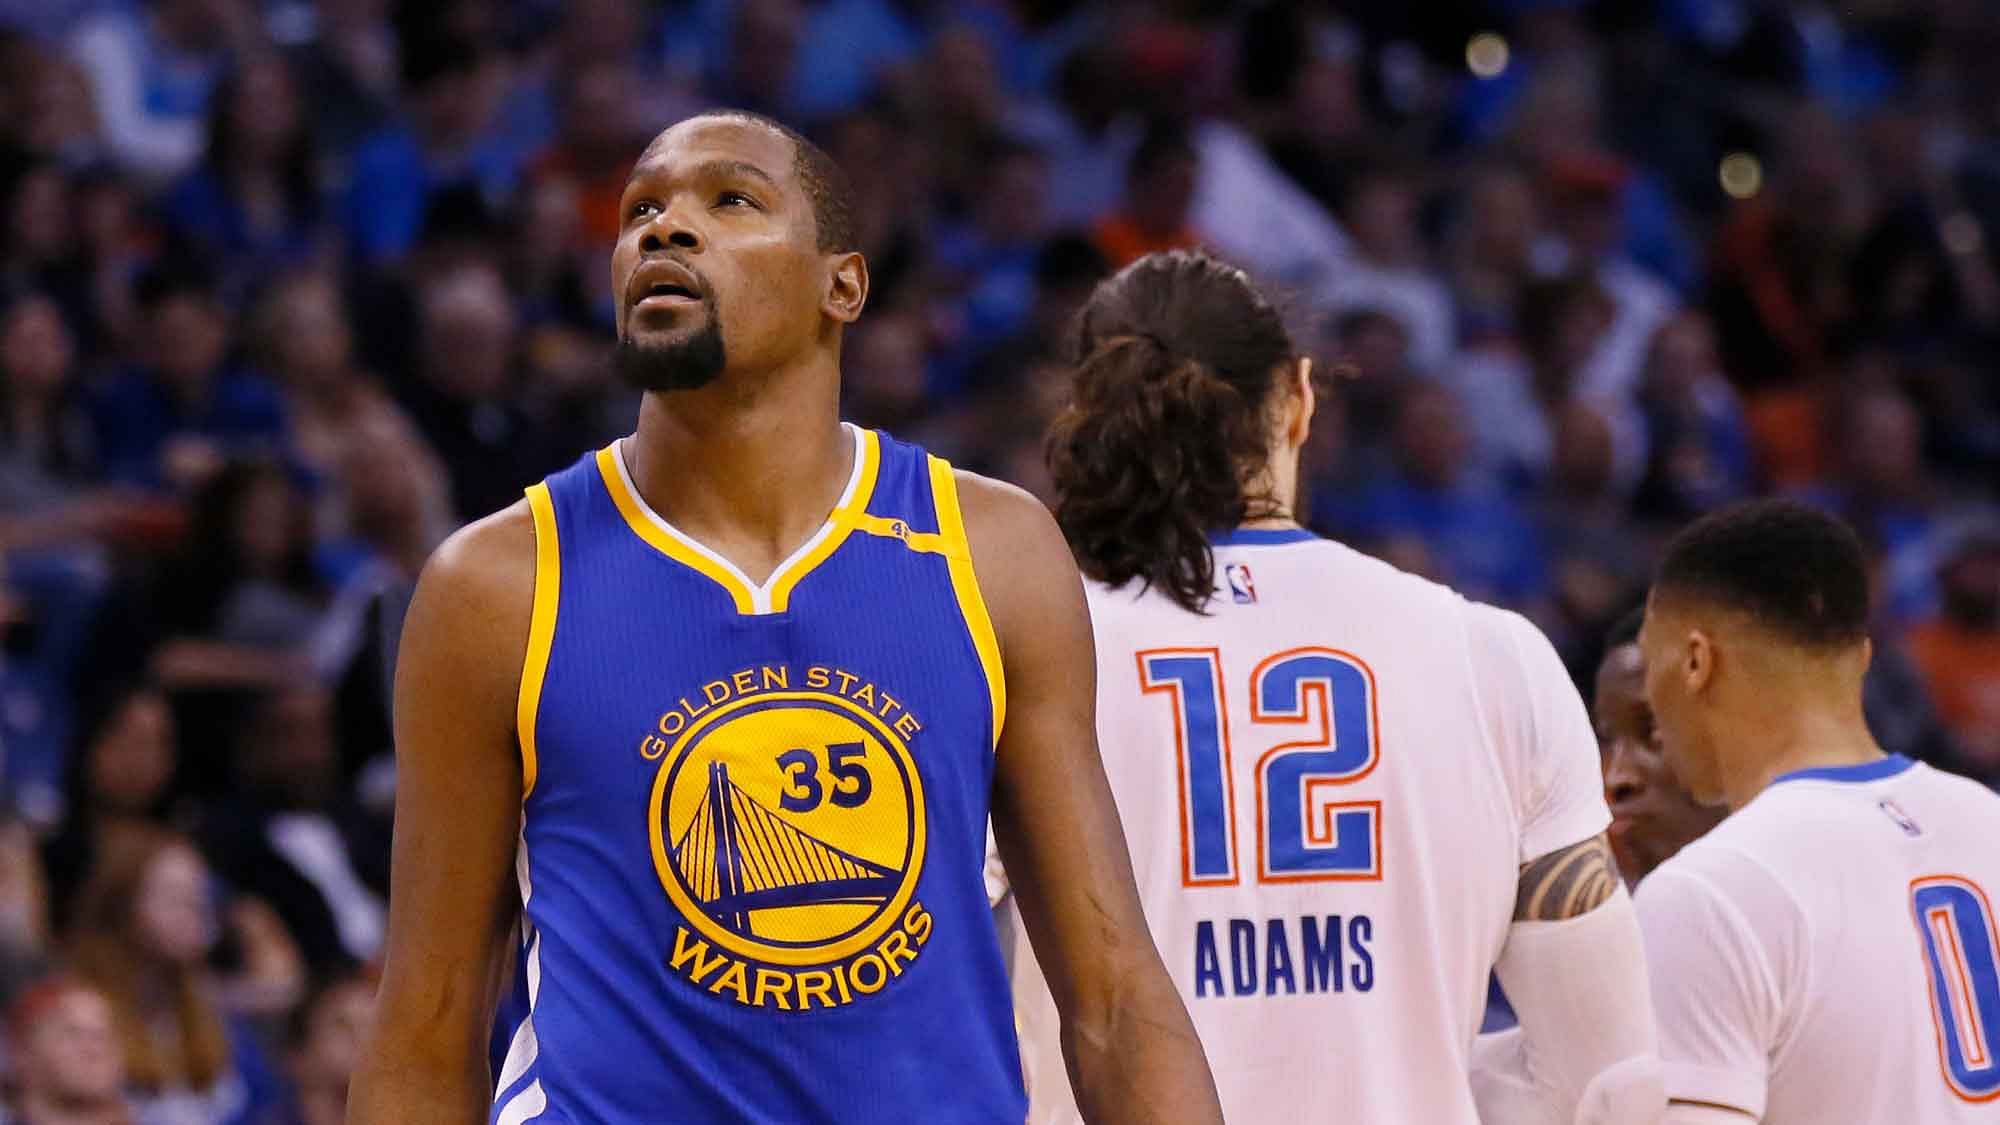 Golden State Warriors forward Kevin Durant (35) walks past former teammates Oklahoma City Thunder center Steven Adams (12) and guard Russell Westbrook (0) in the second quarter of an NBA basketball game in Oklahoma City, Saturday, Feb. 11, 2017. (AP Photo/Sue Ogrocki)